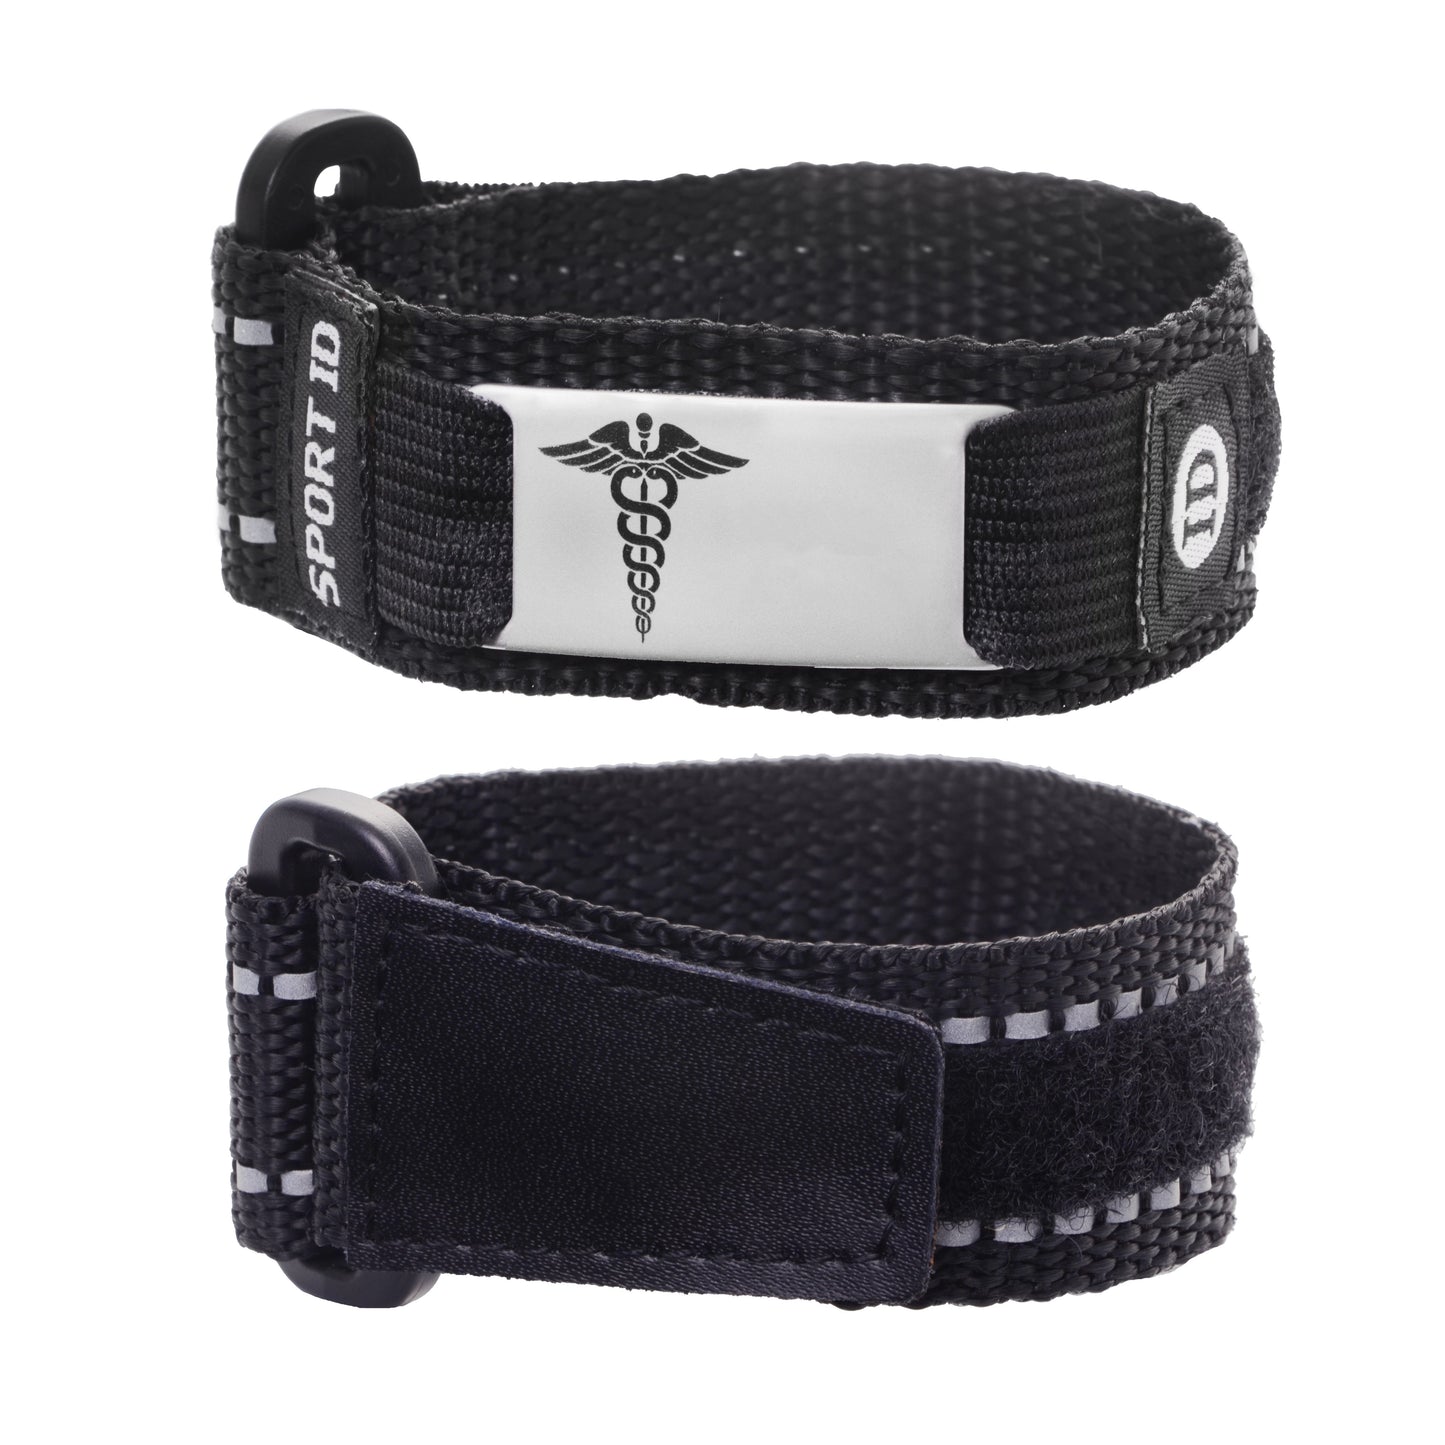 Sport Nylon Medical Alert Bracelets Stainless Steel id Plate with Reflective Strip Adjustable Lengths 6.5-7.5 inches